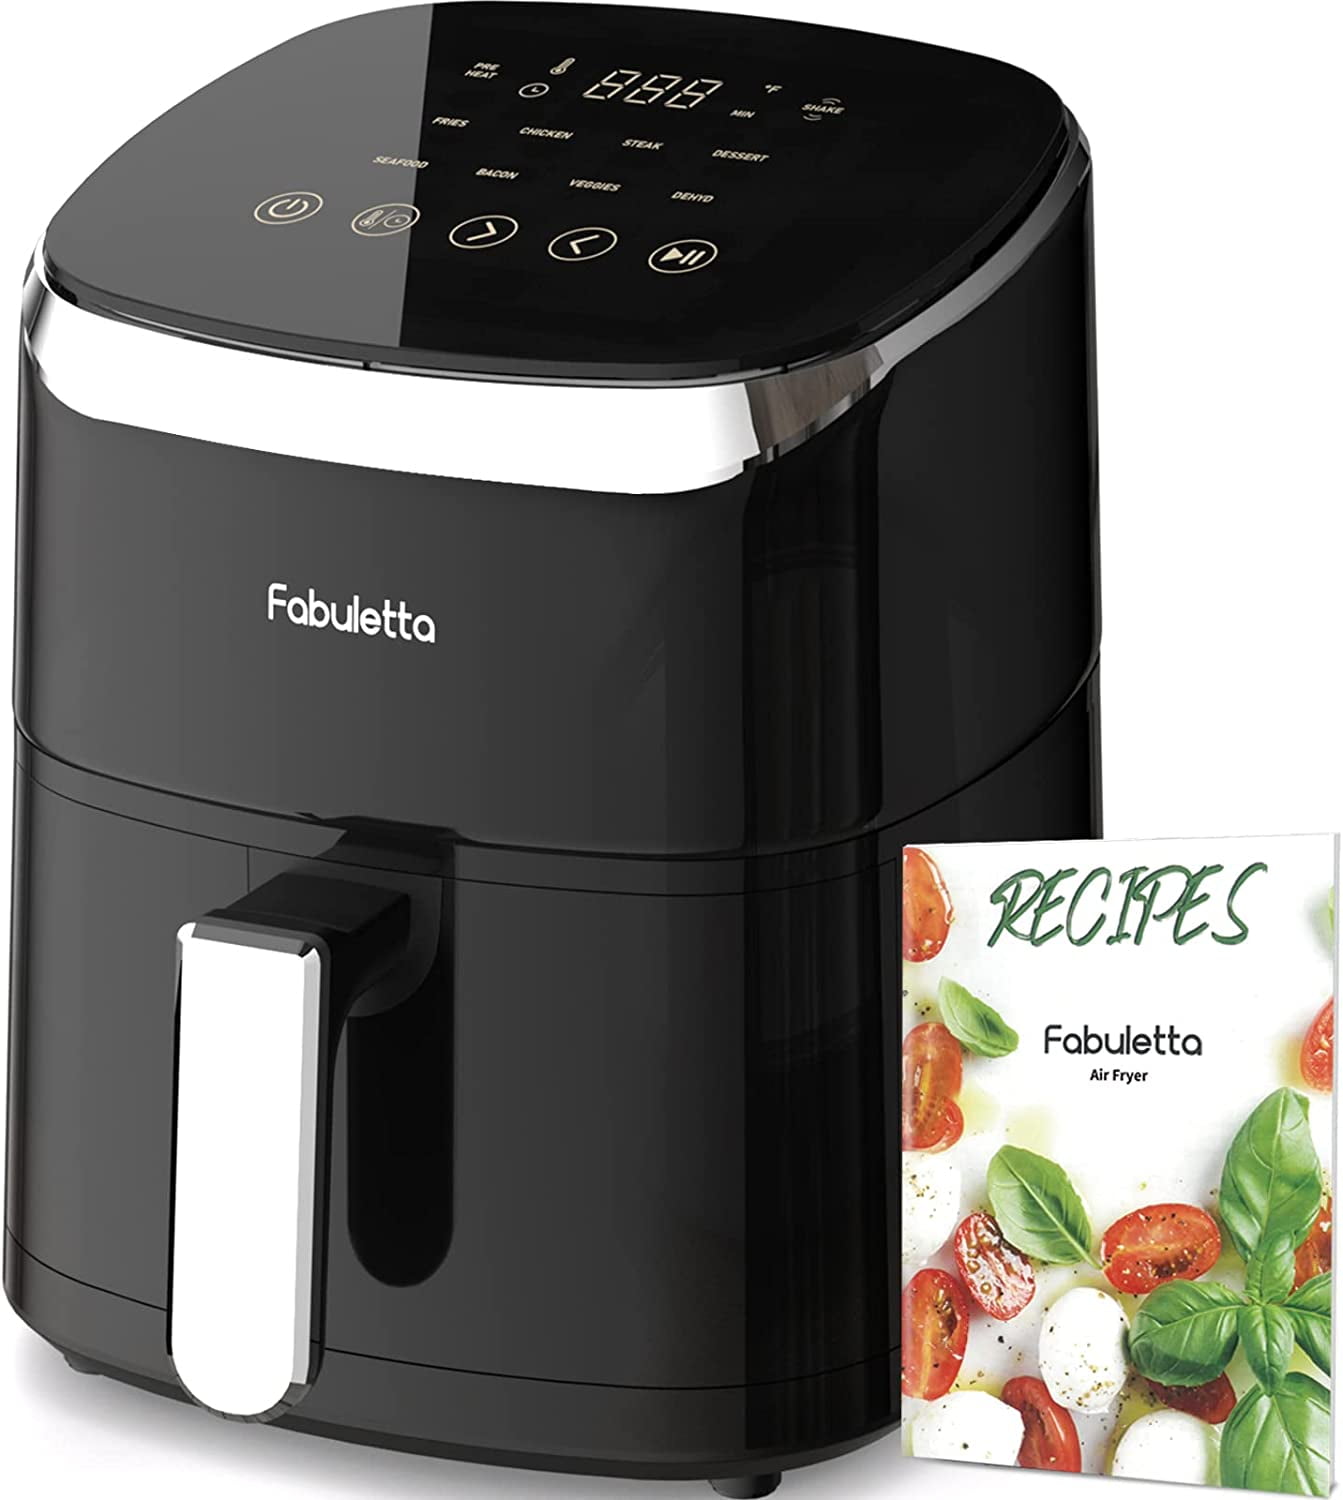 Fritaire Self-Cleaning Glass Bowl Air Fryer, 5-Qt, White